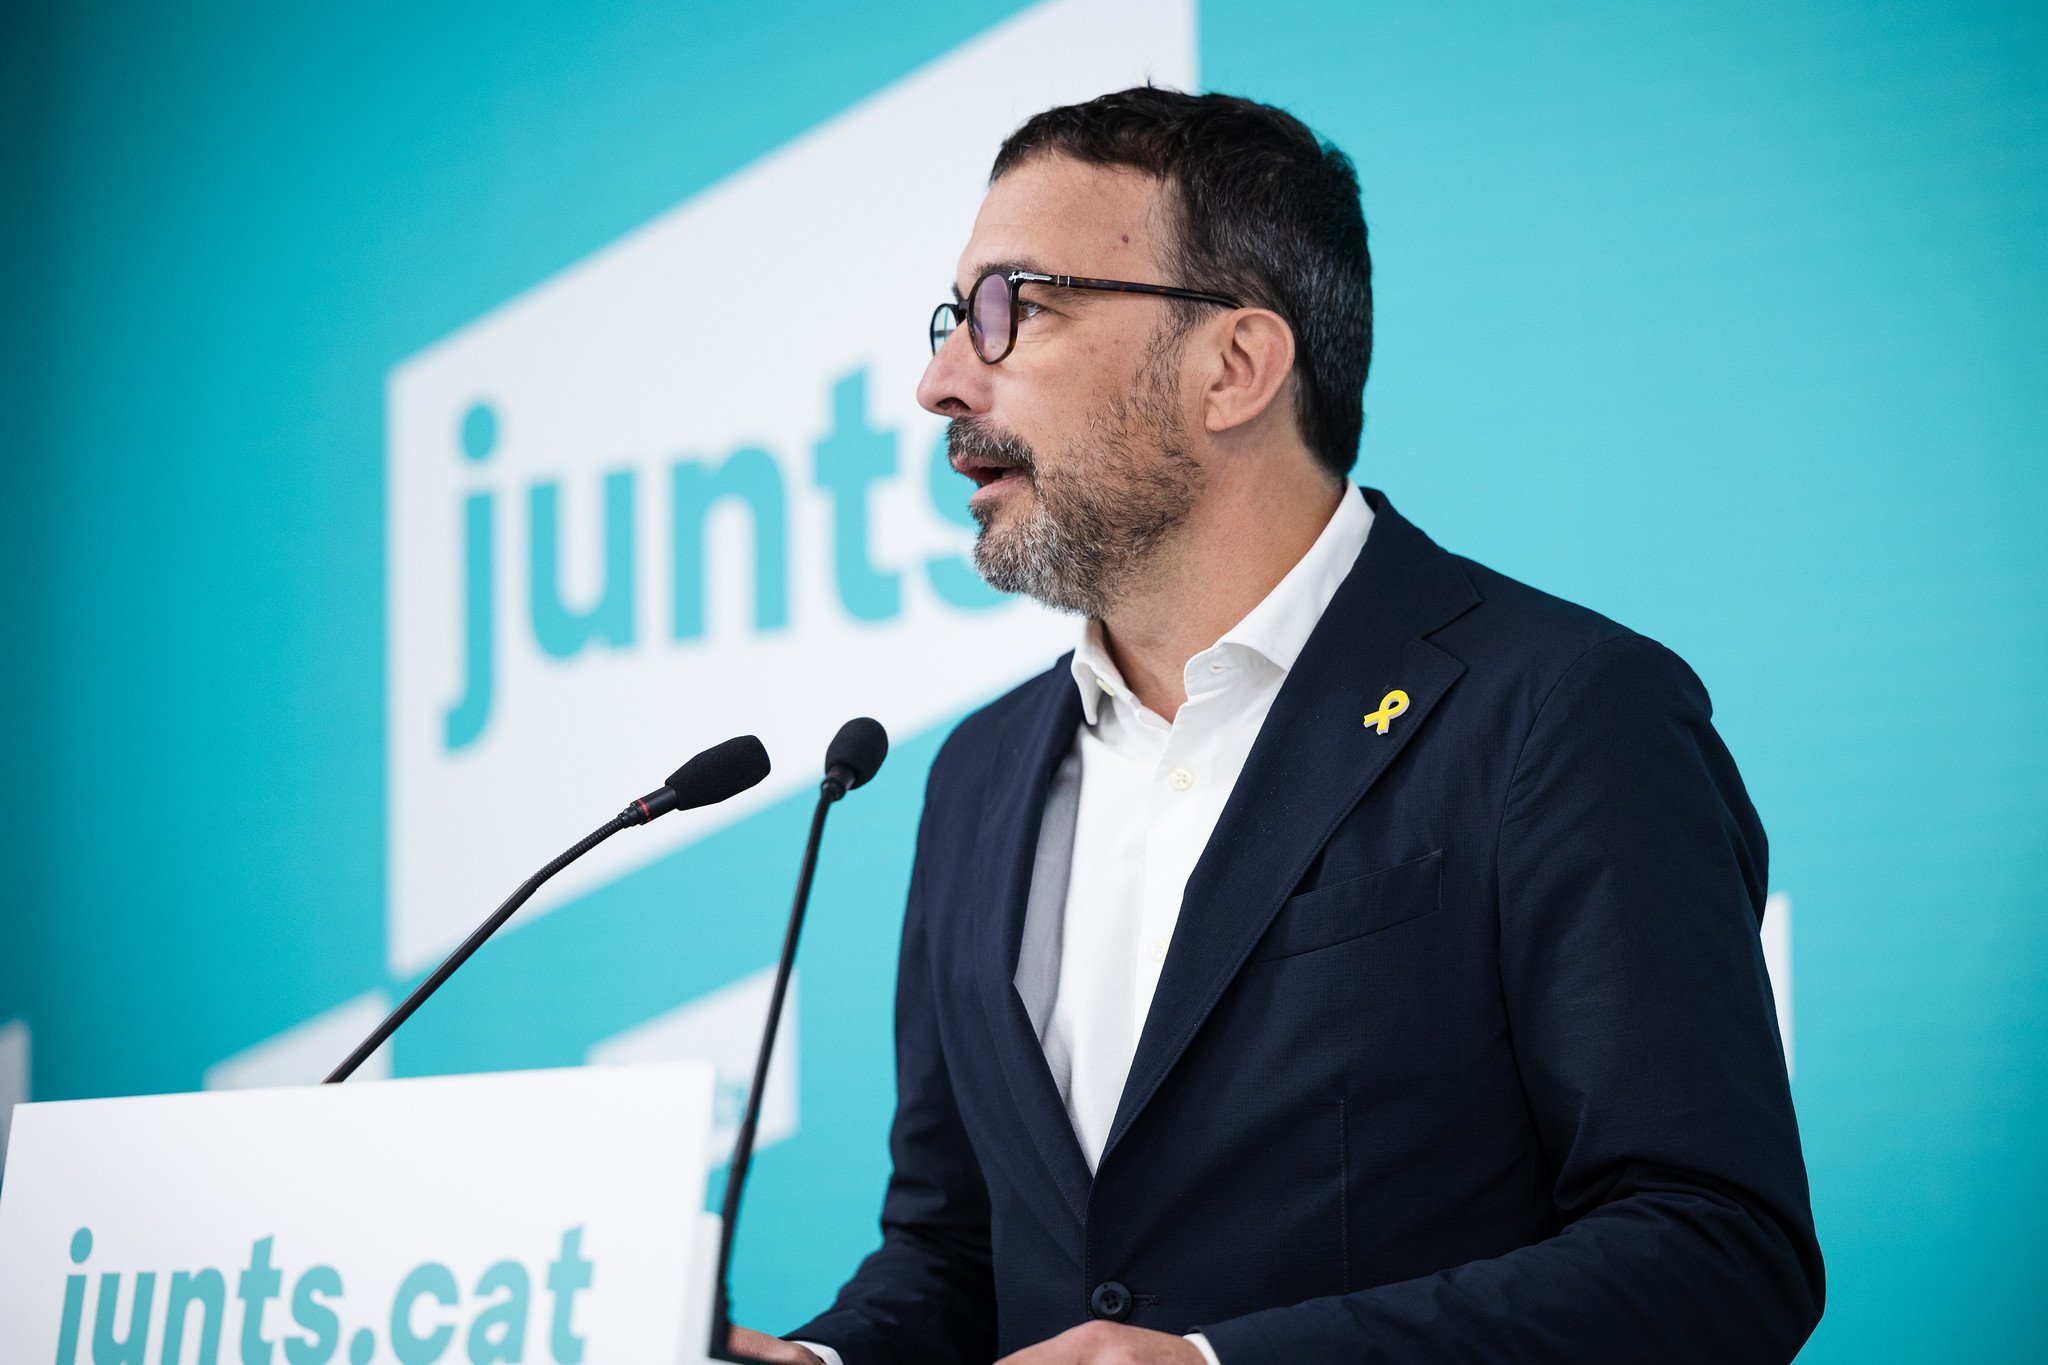 Junts insists that the Dalmases affair is closed and proposes new vice president